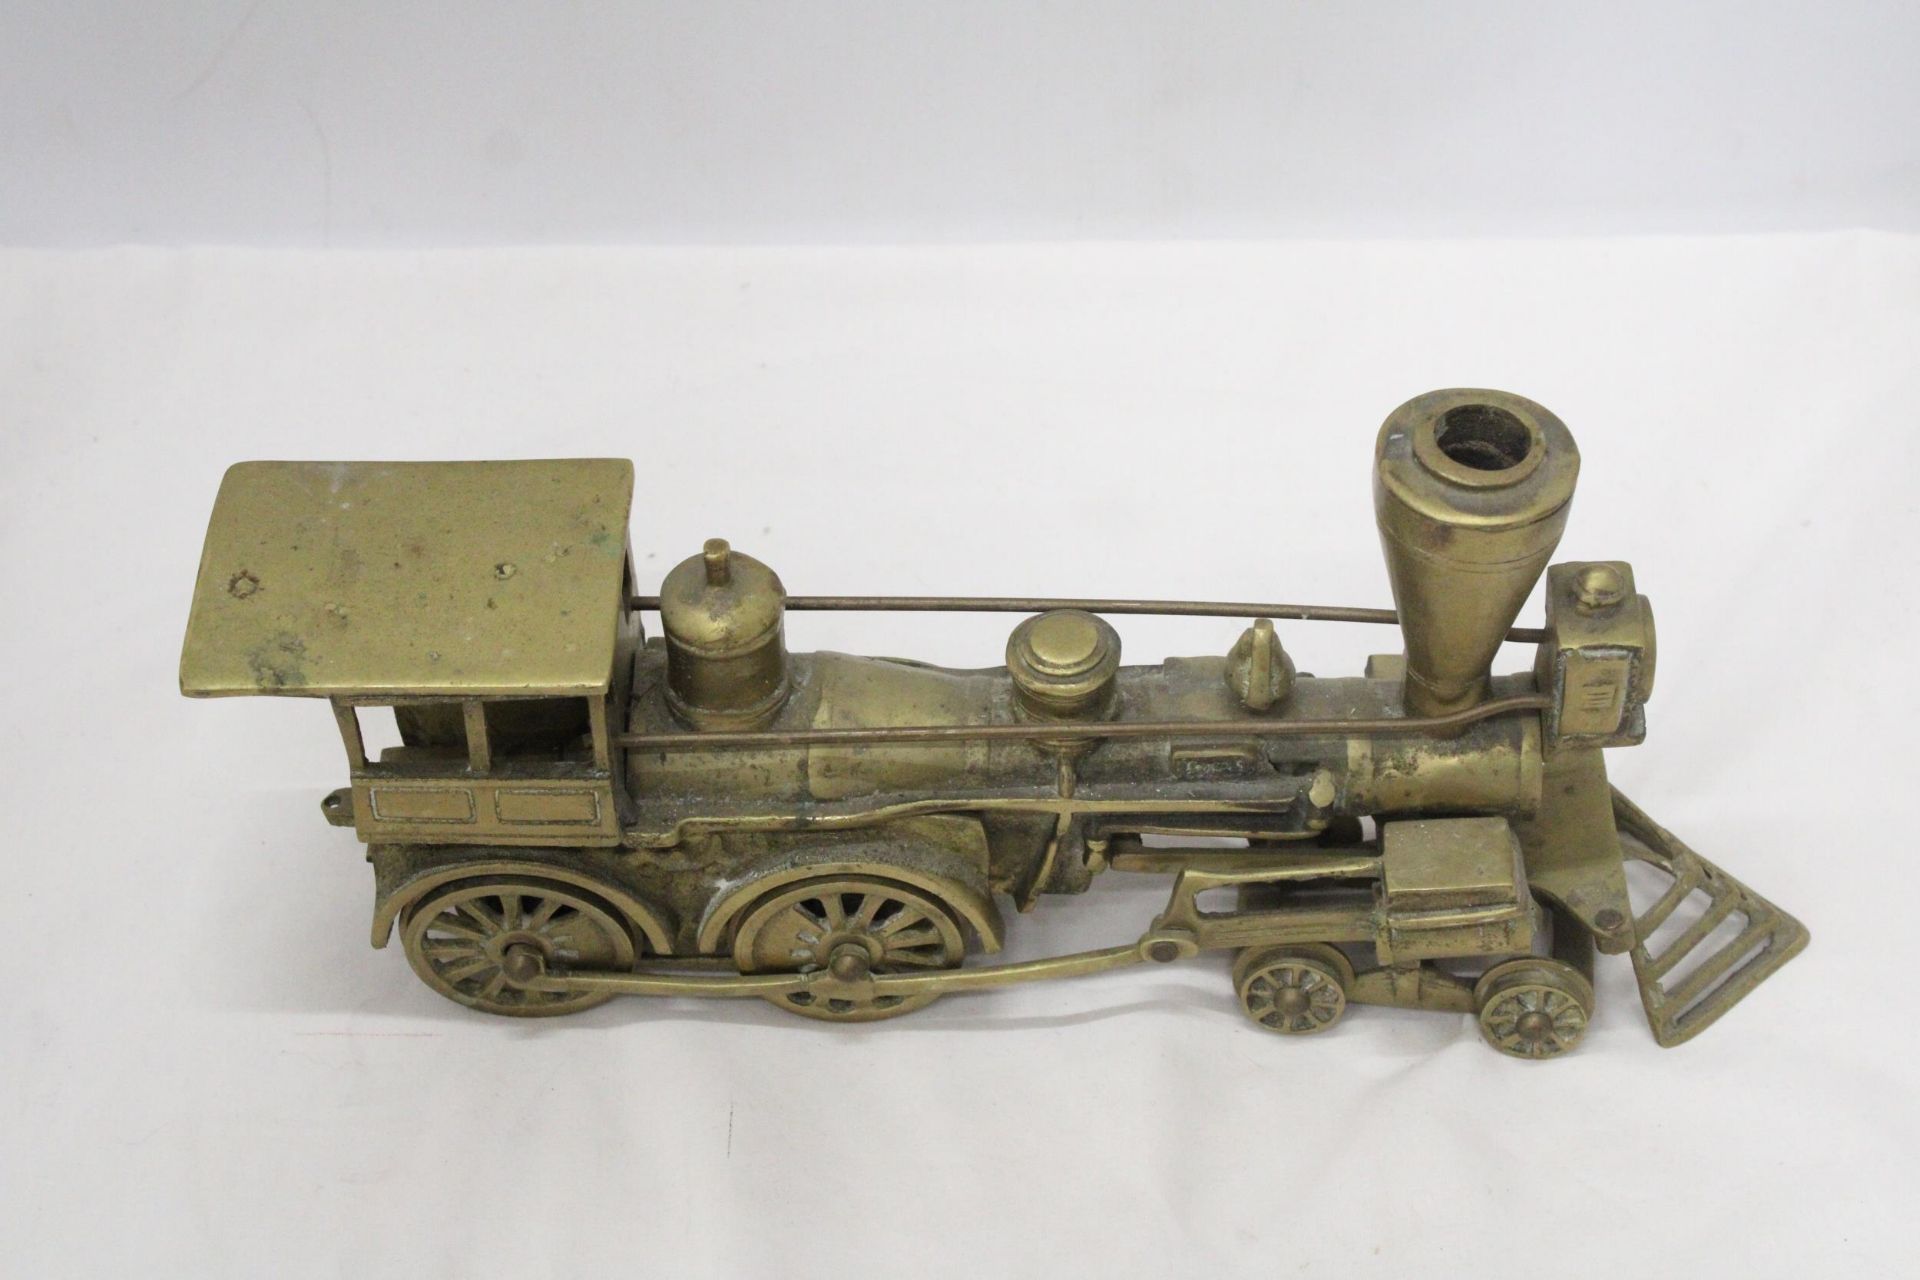 A W & AFR SOLID BRASS RAILROAD USA LOCO AND TENDER - WEIGHTS 6 KILO'S (53 cm) - Image 7 of 7